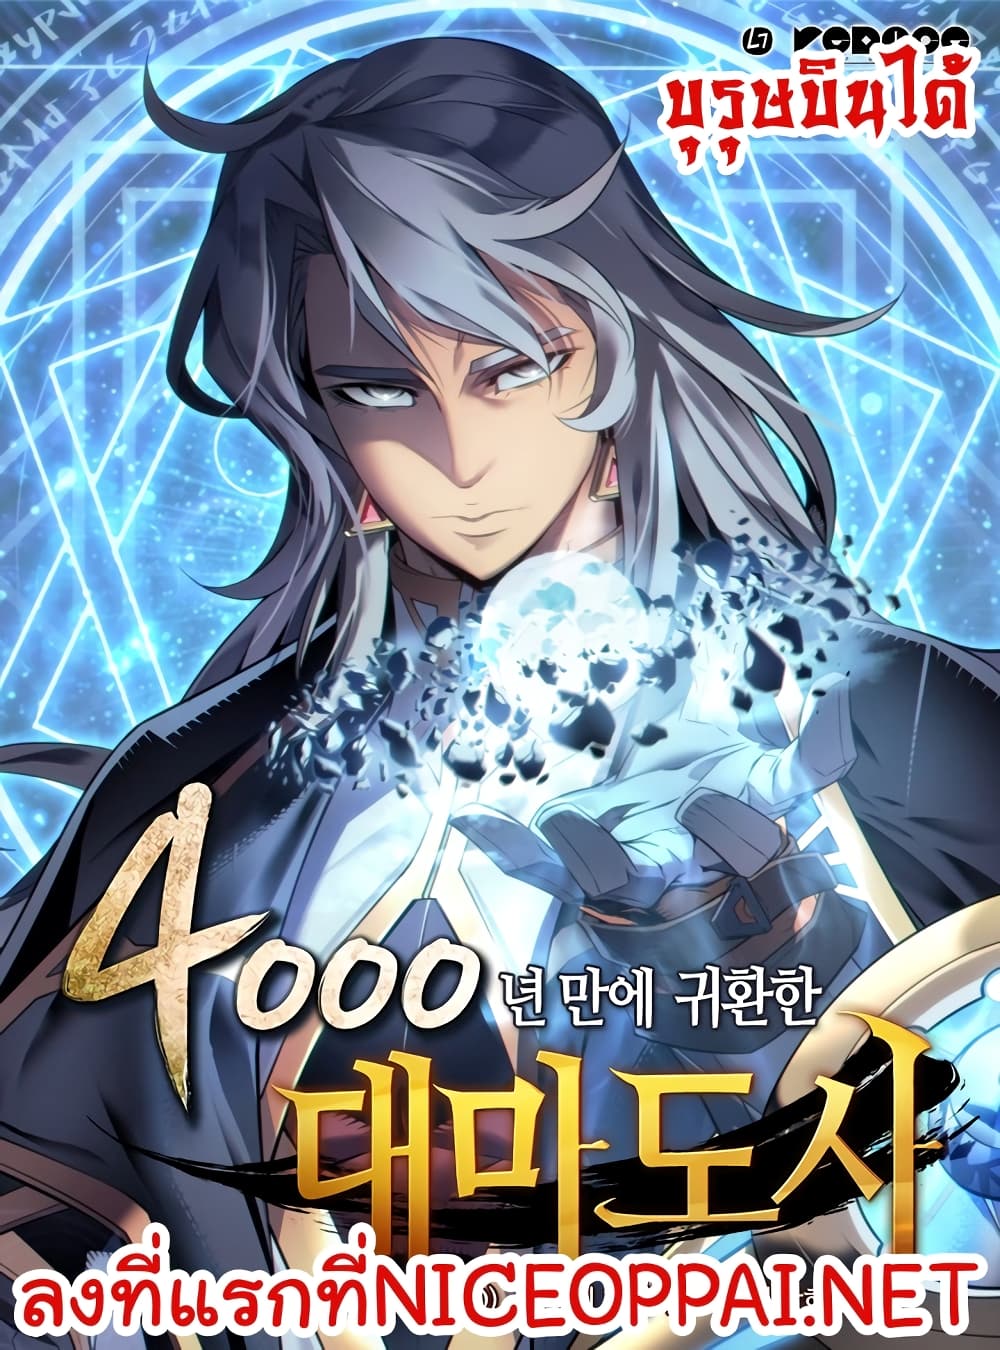 The Great Mage Returns After 4000 Years 40 (1)